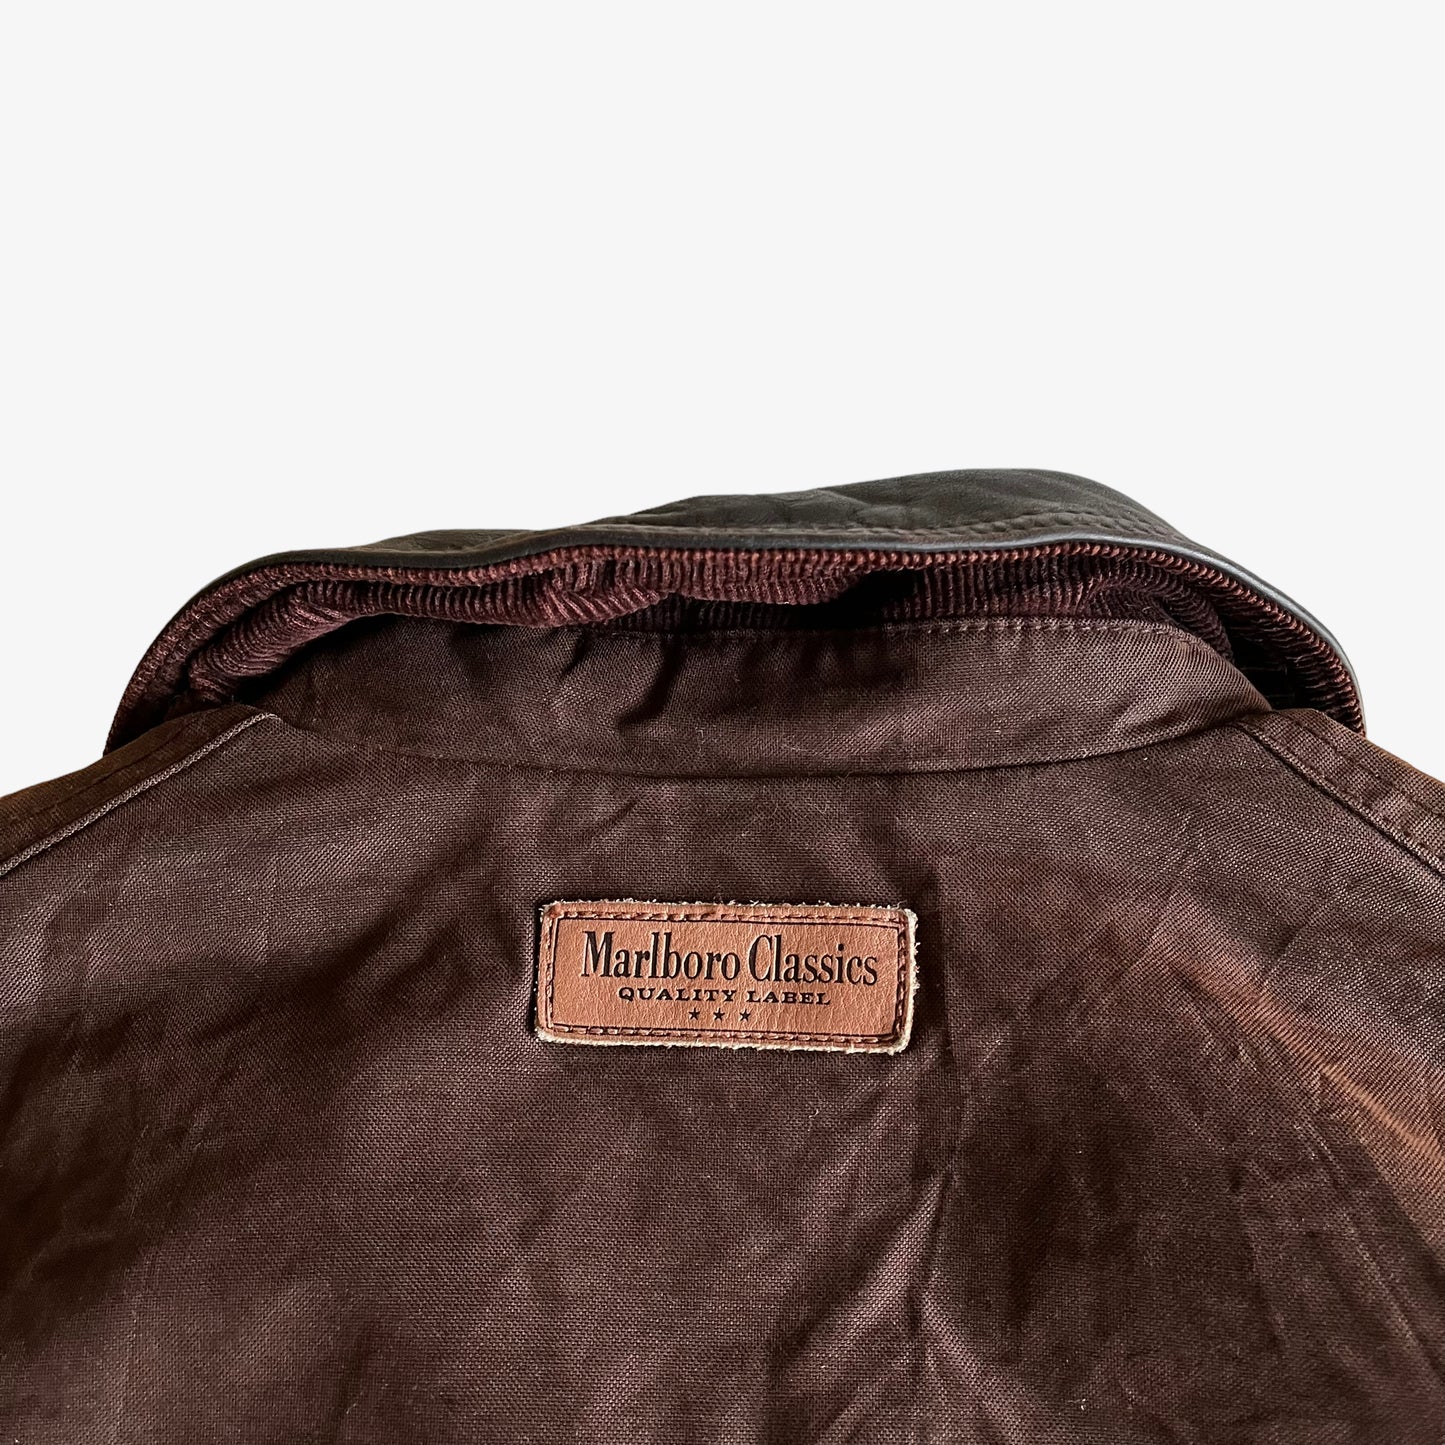 Vintage 90s Marlboro Classics Brown Waxed Jacket With Black Leather Collar Back Label - Casspios Dream